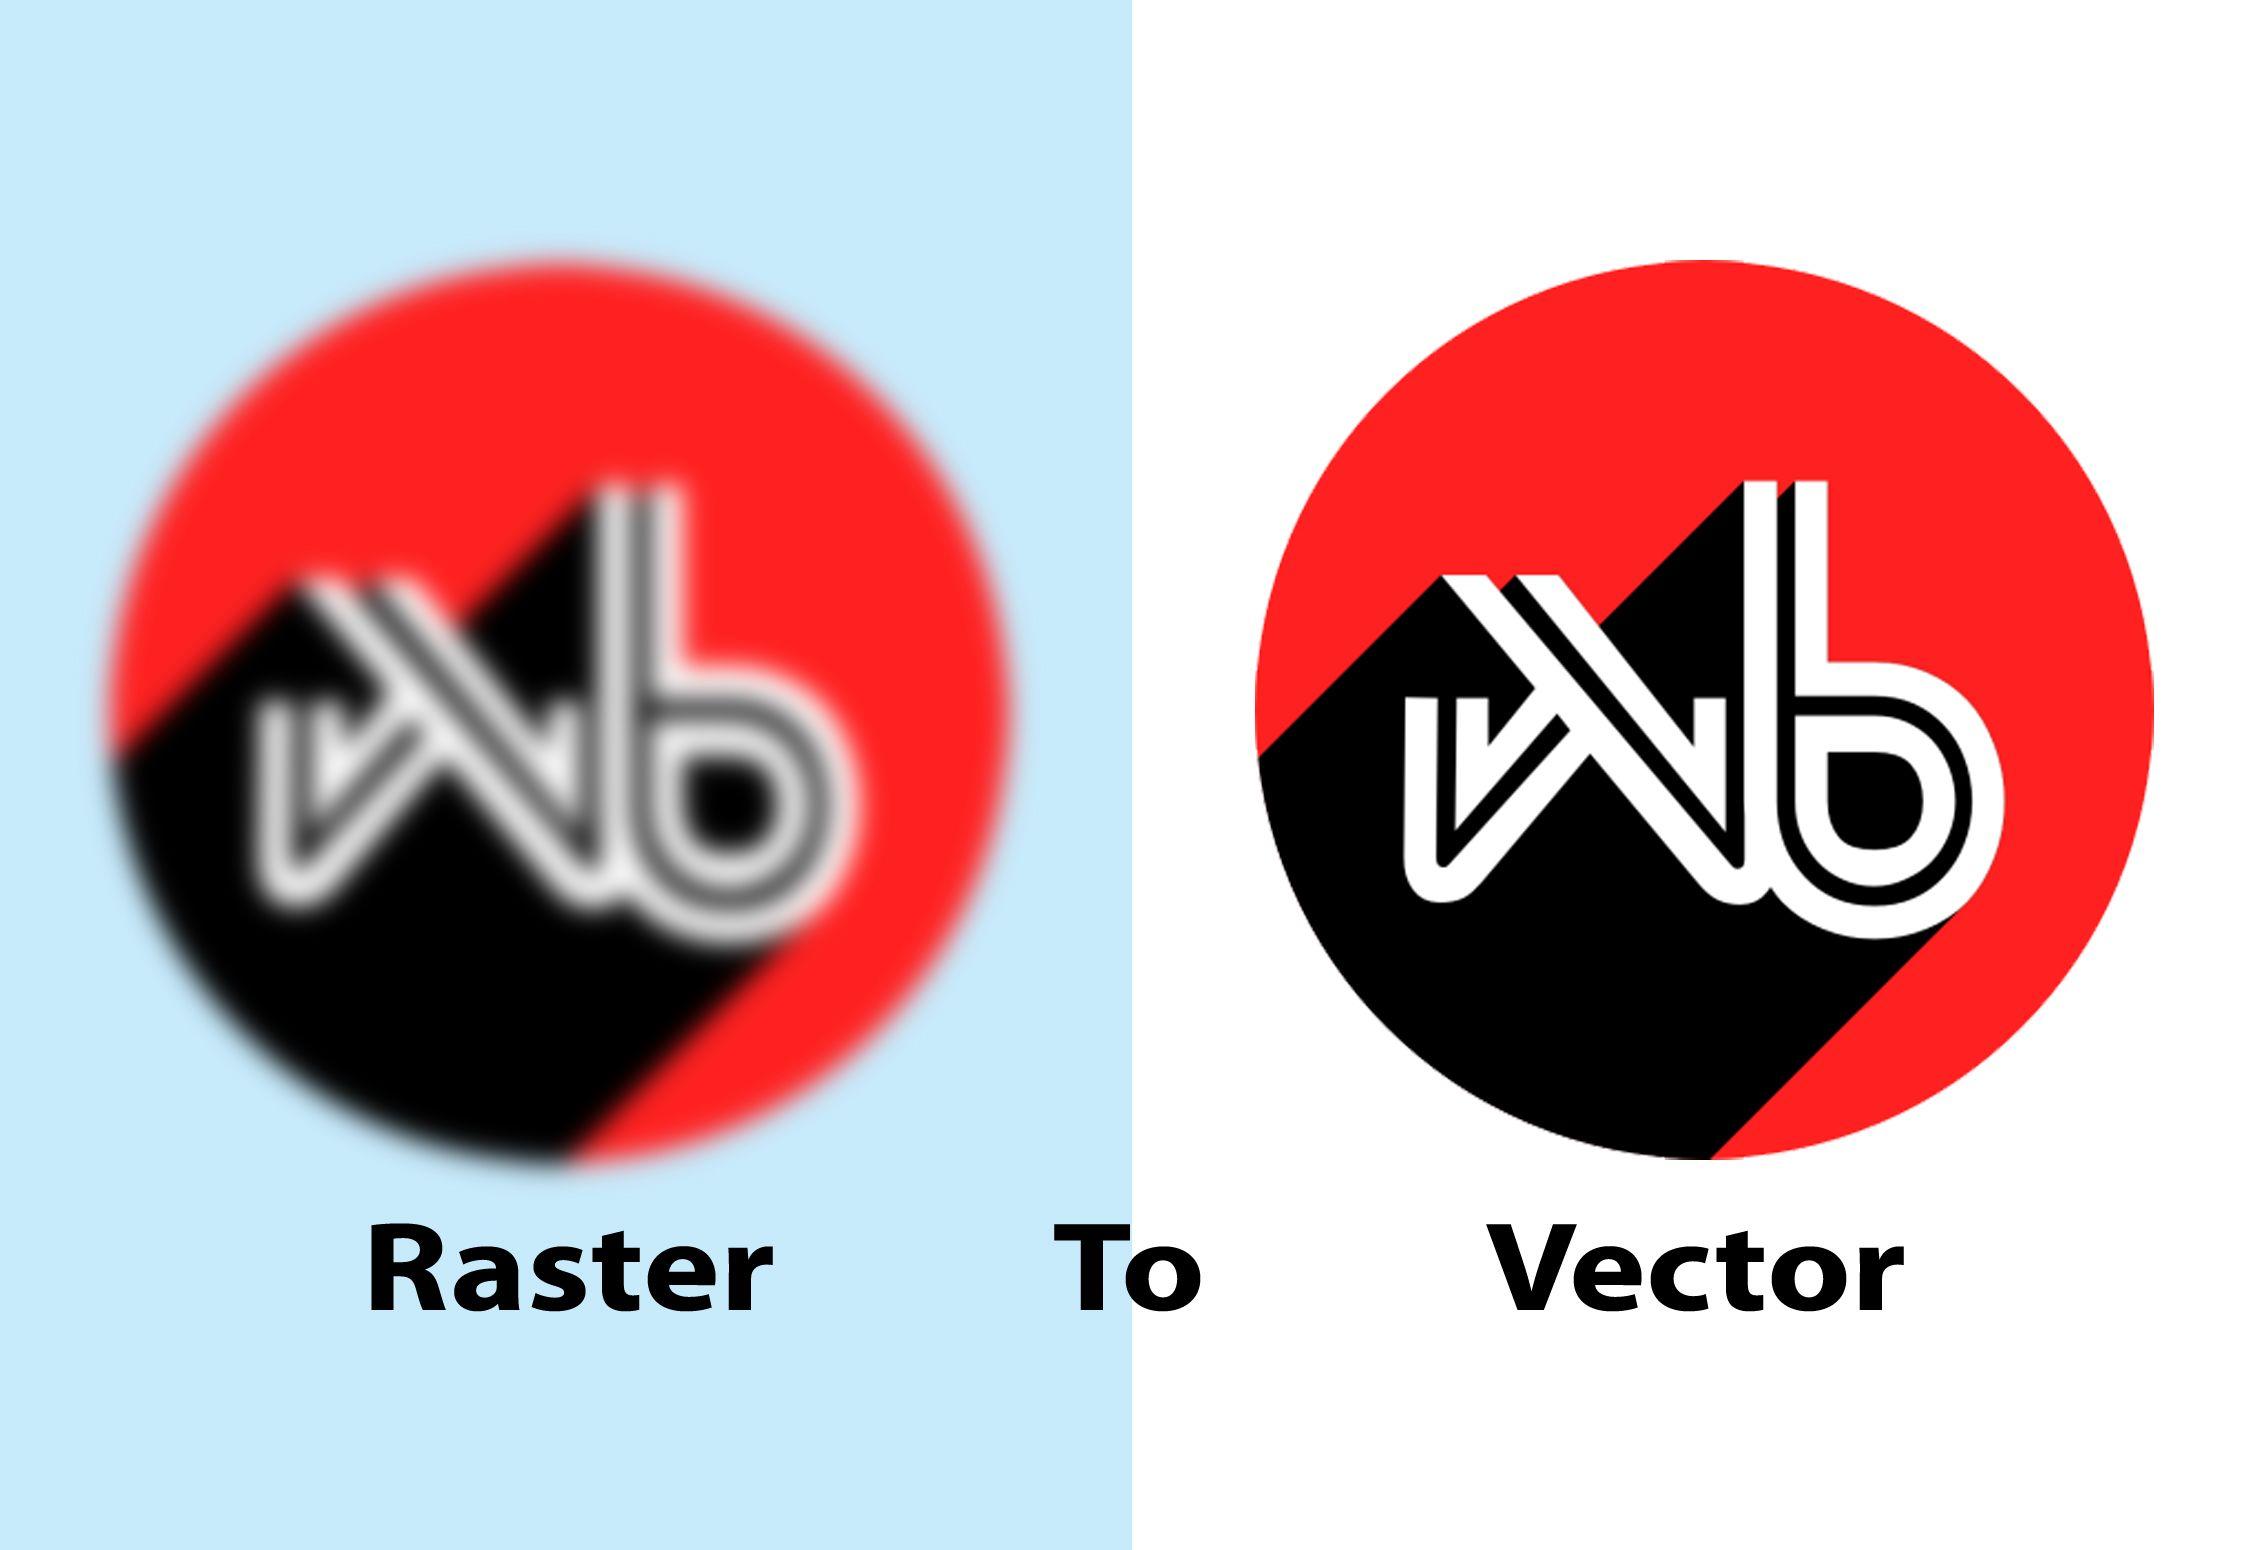 Raster Logo - I WILL DO VECTOR TRACE OR IMAGE TO VECTOR ANY LOW RESOLUTION / FUZZY ...